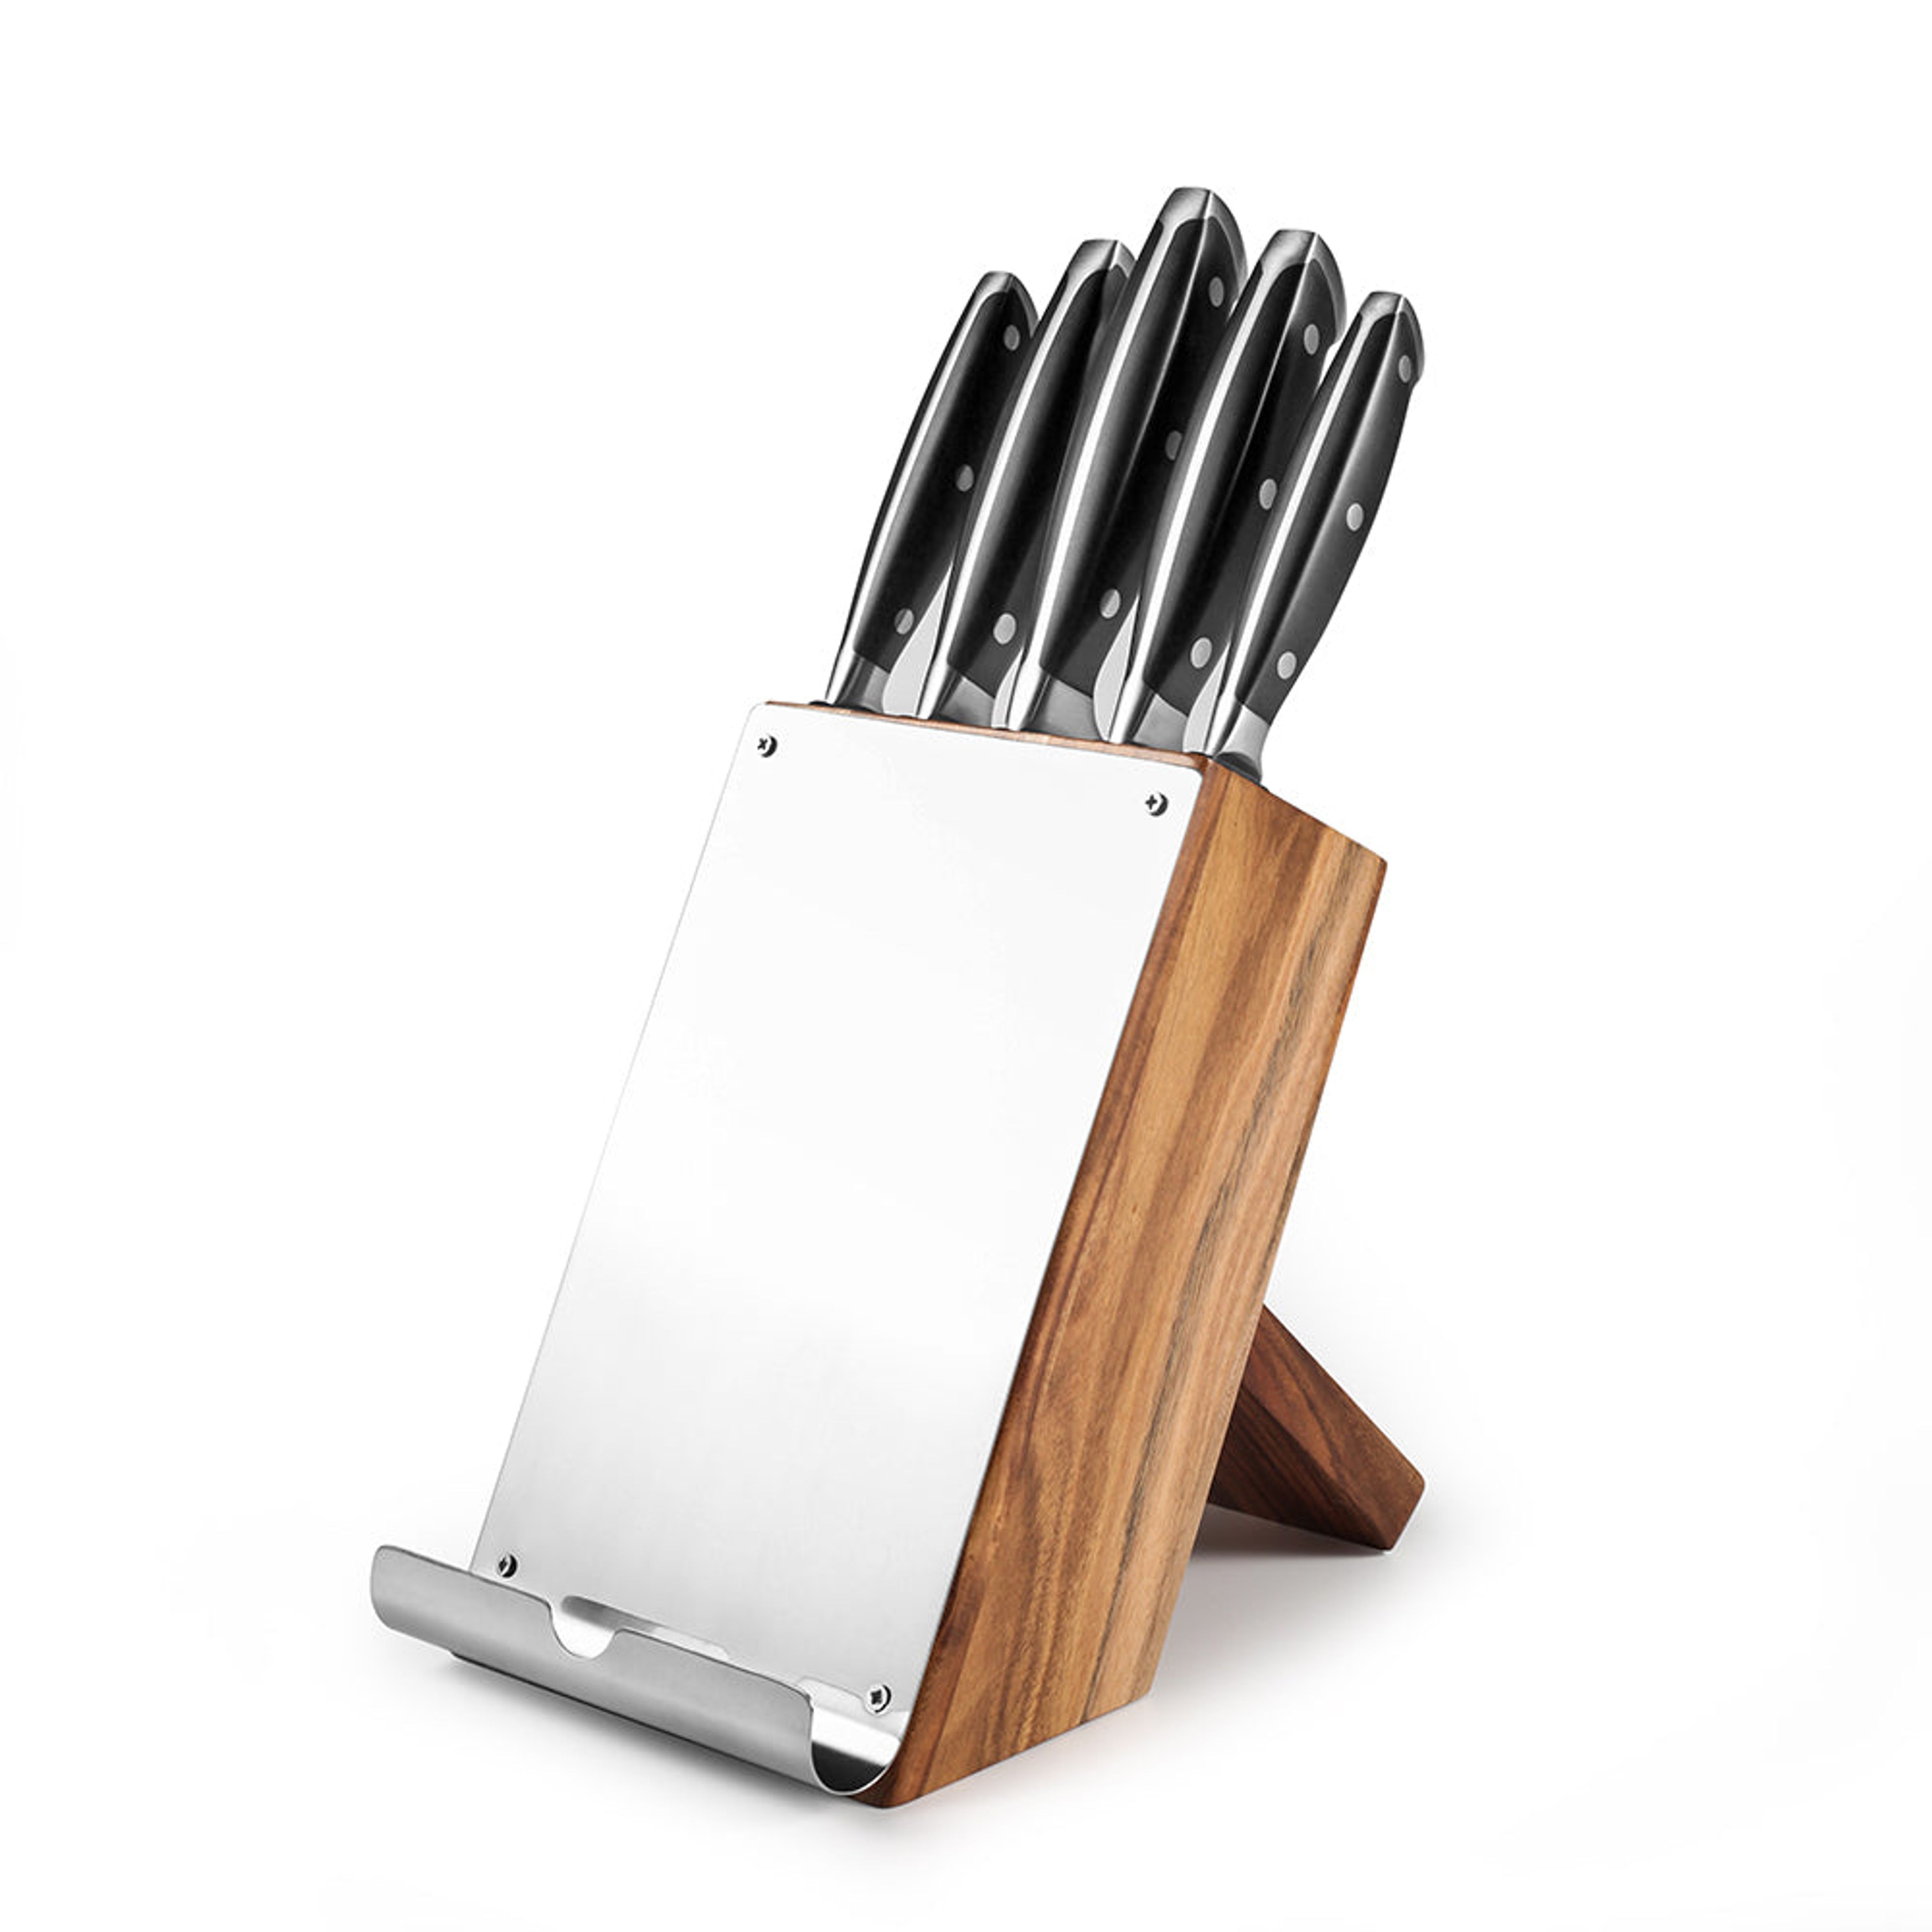 Buy 1 get 1 FREE - Bill.F 6 Pieces Knife Block Set With Tablet/Cookbook Stand